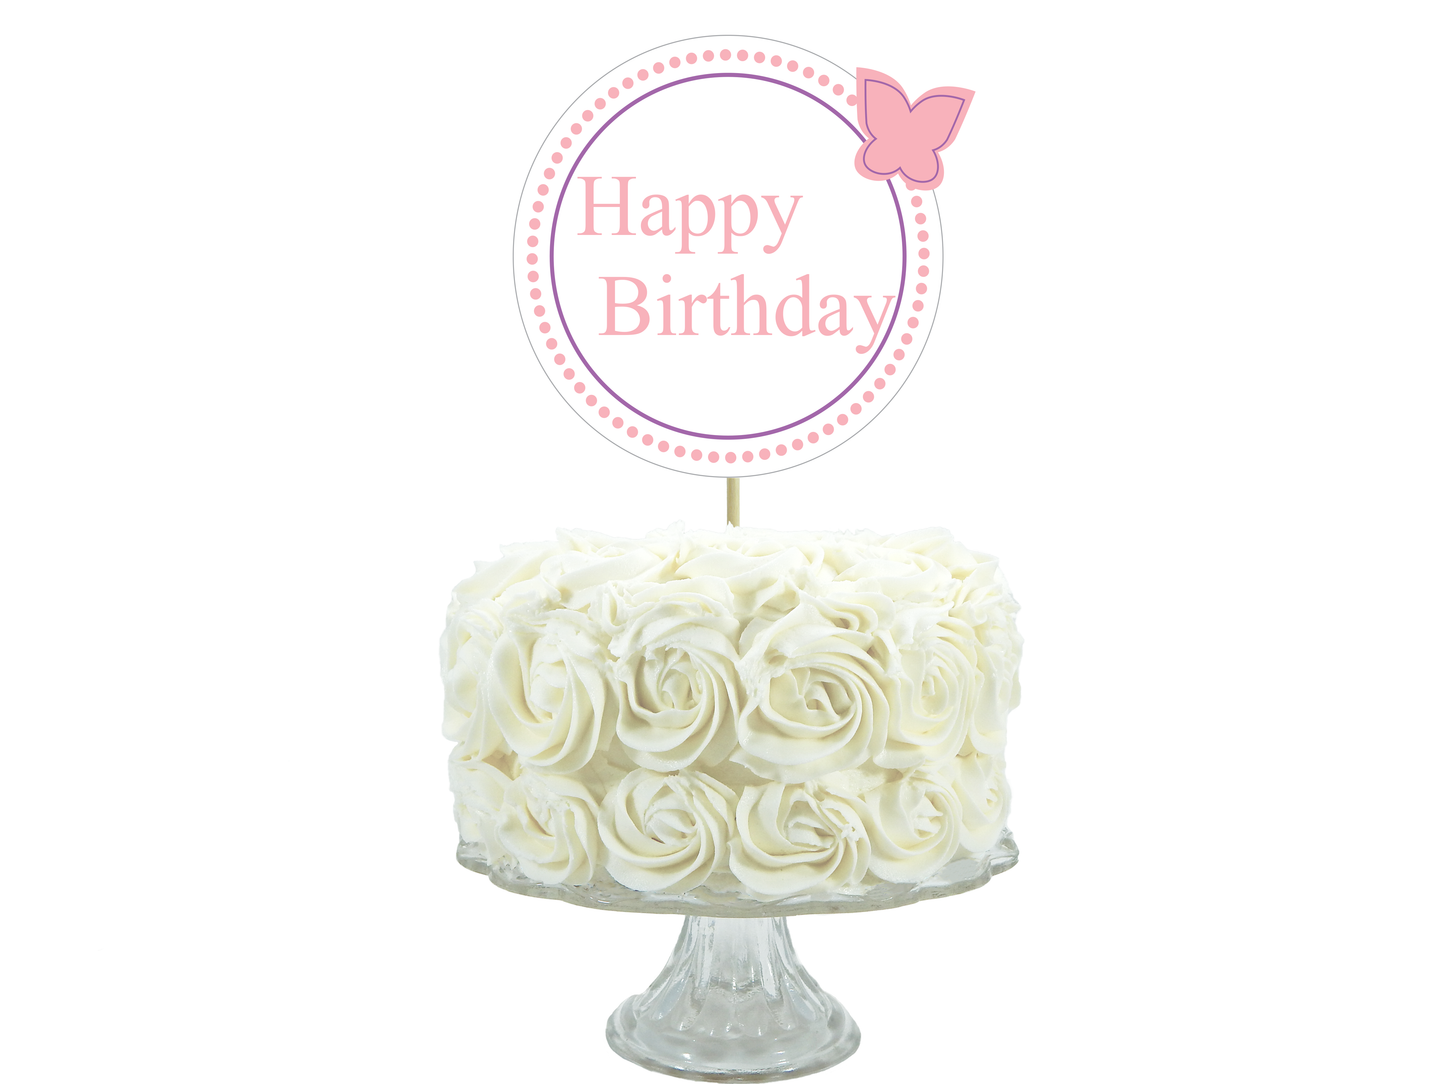 Printable happy birthday butterfly cake topper - Celebrating Together